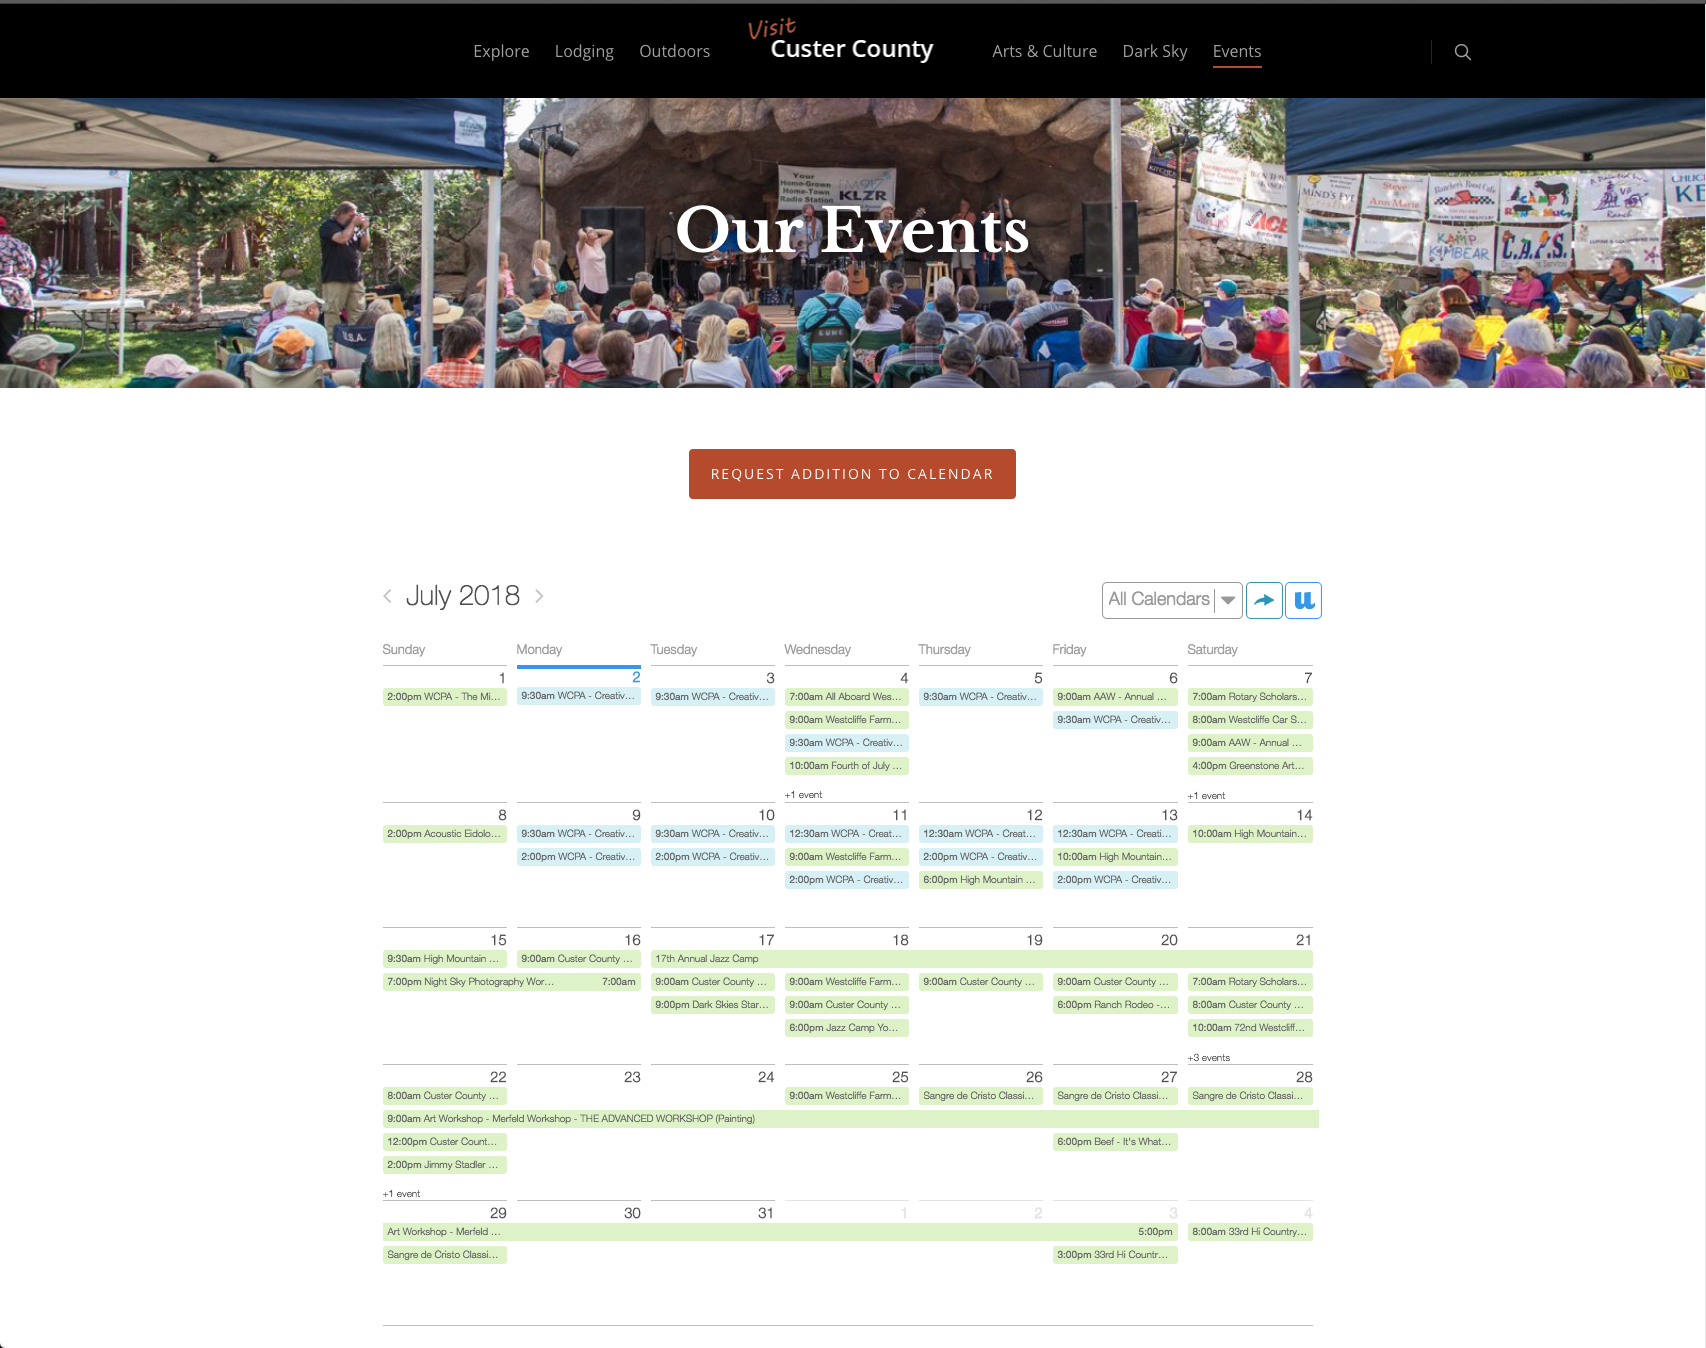 Events in Custer County